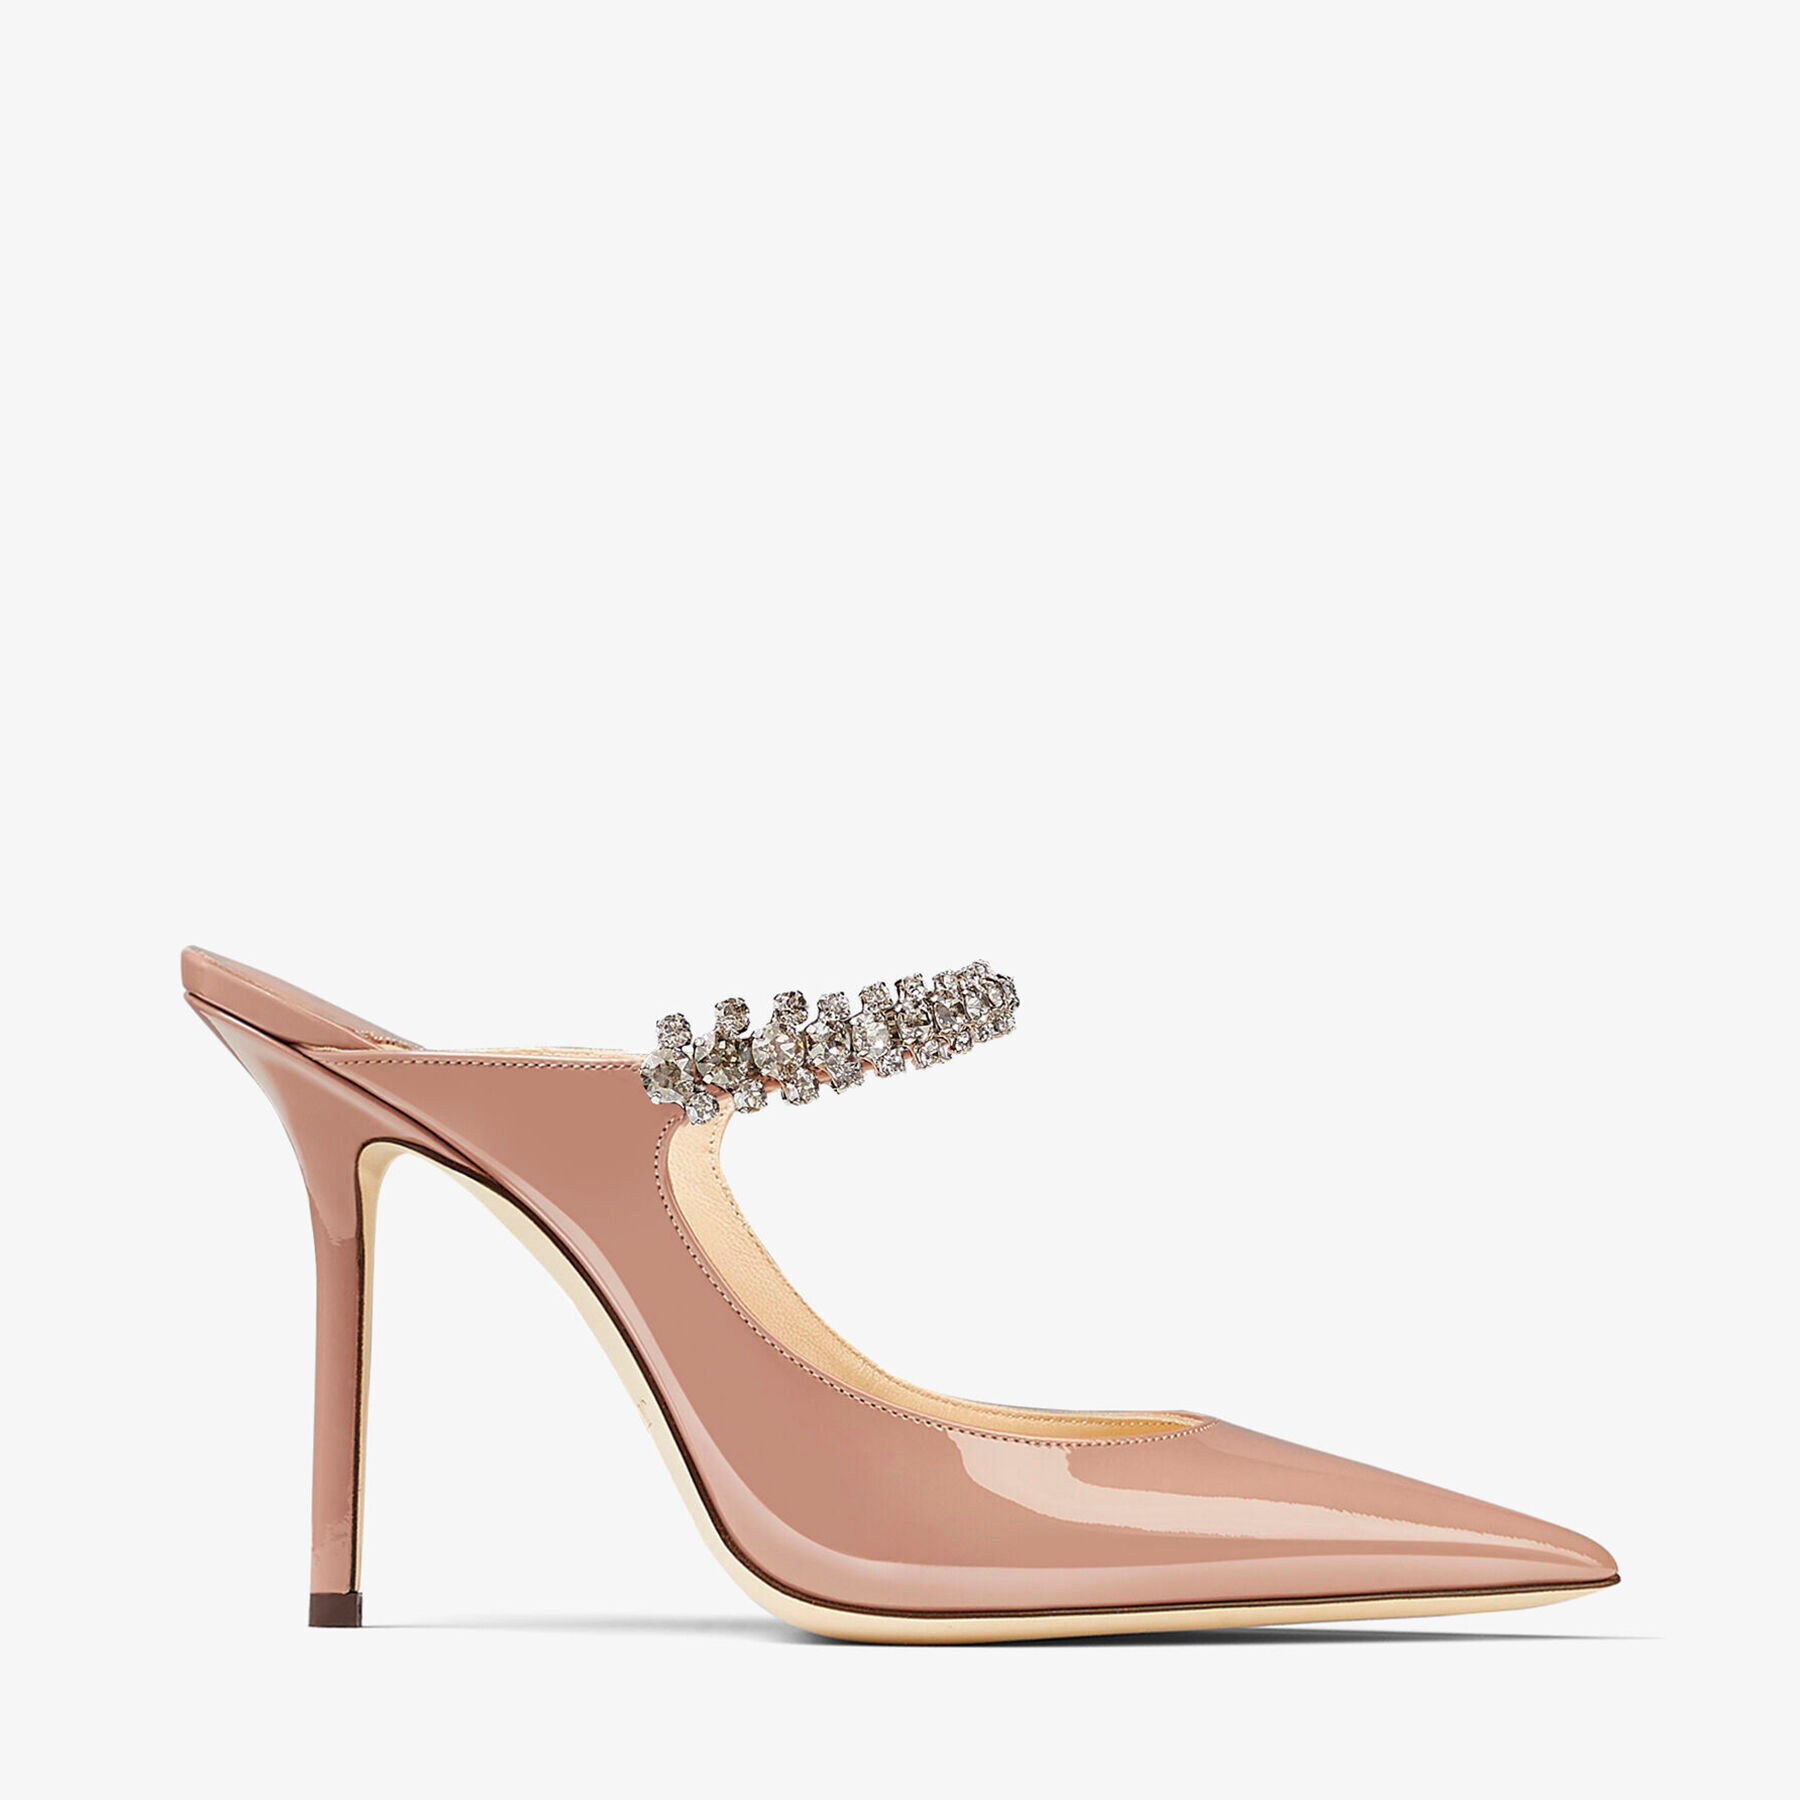 Bing 100, Ballet Pink Patent Leather Mules with Crystal Strap